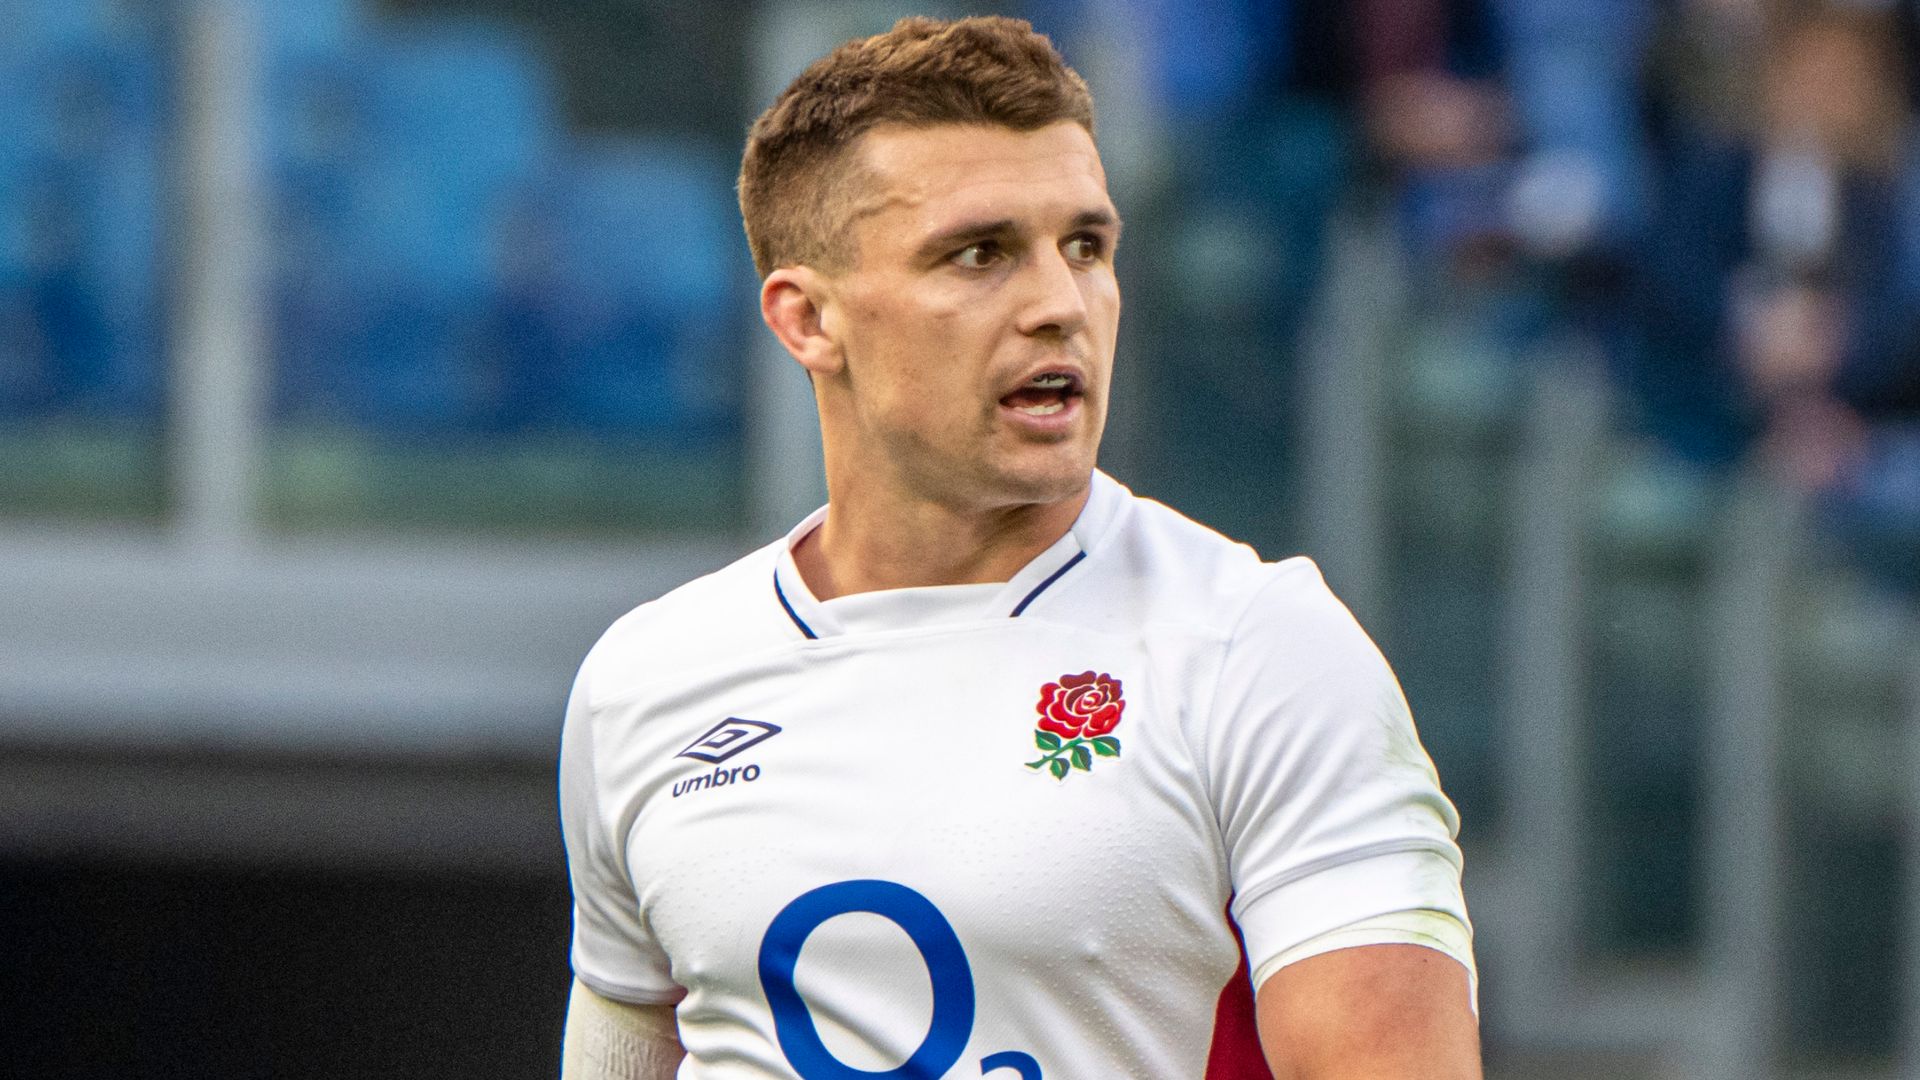 England Rugby World Cup squad: Slade and Dombrandt miss out